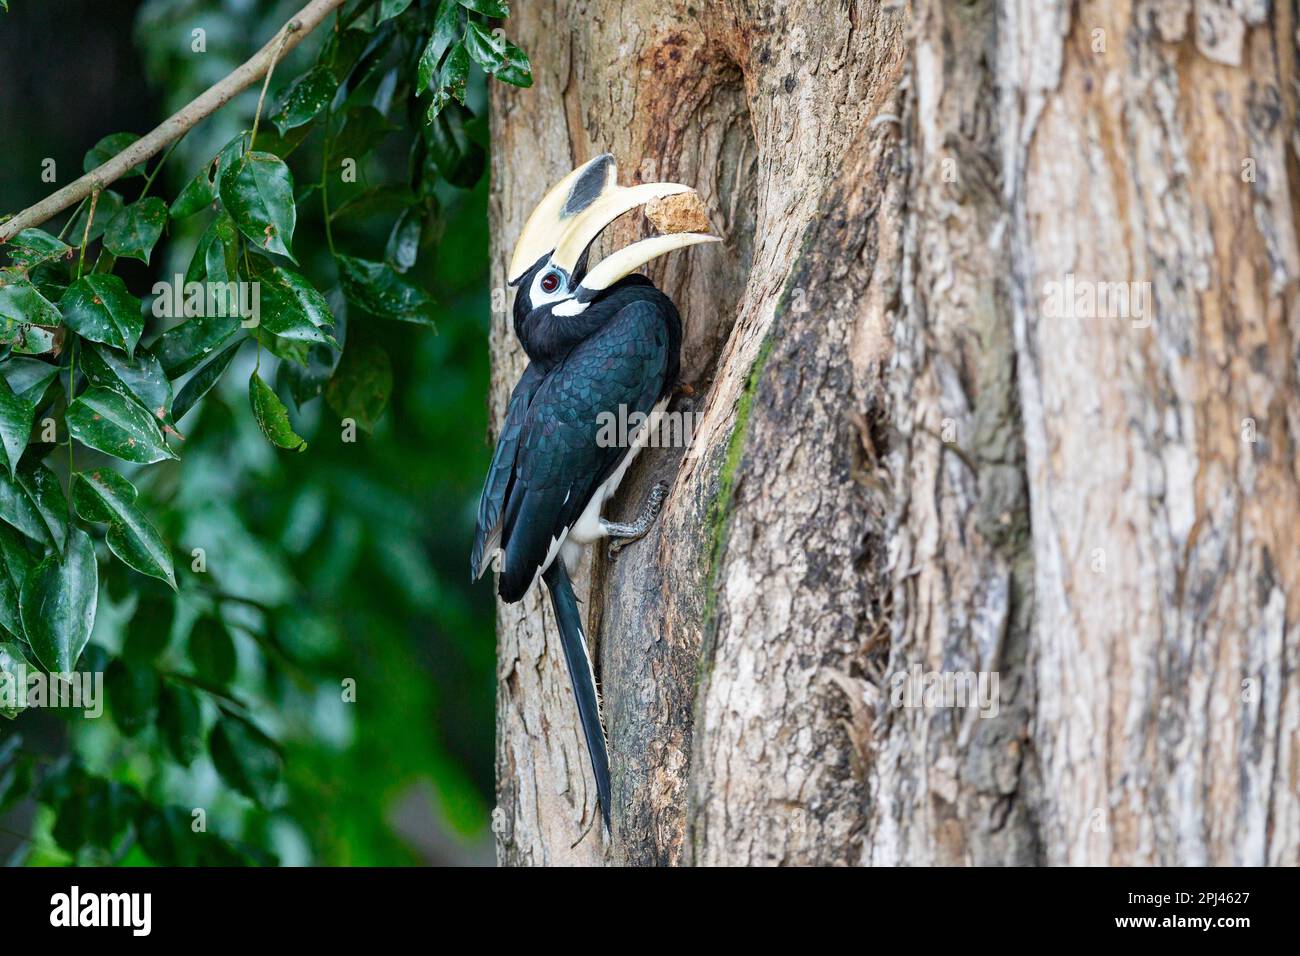 Adult male oriental pied hornbill brings earth (from a nearby construction site) to the female building nest inside hole of Angsana tree, Singapore Stock Photo